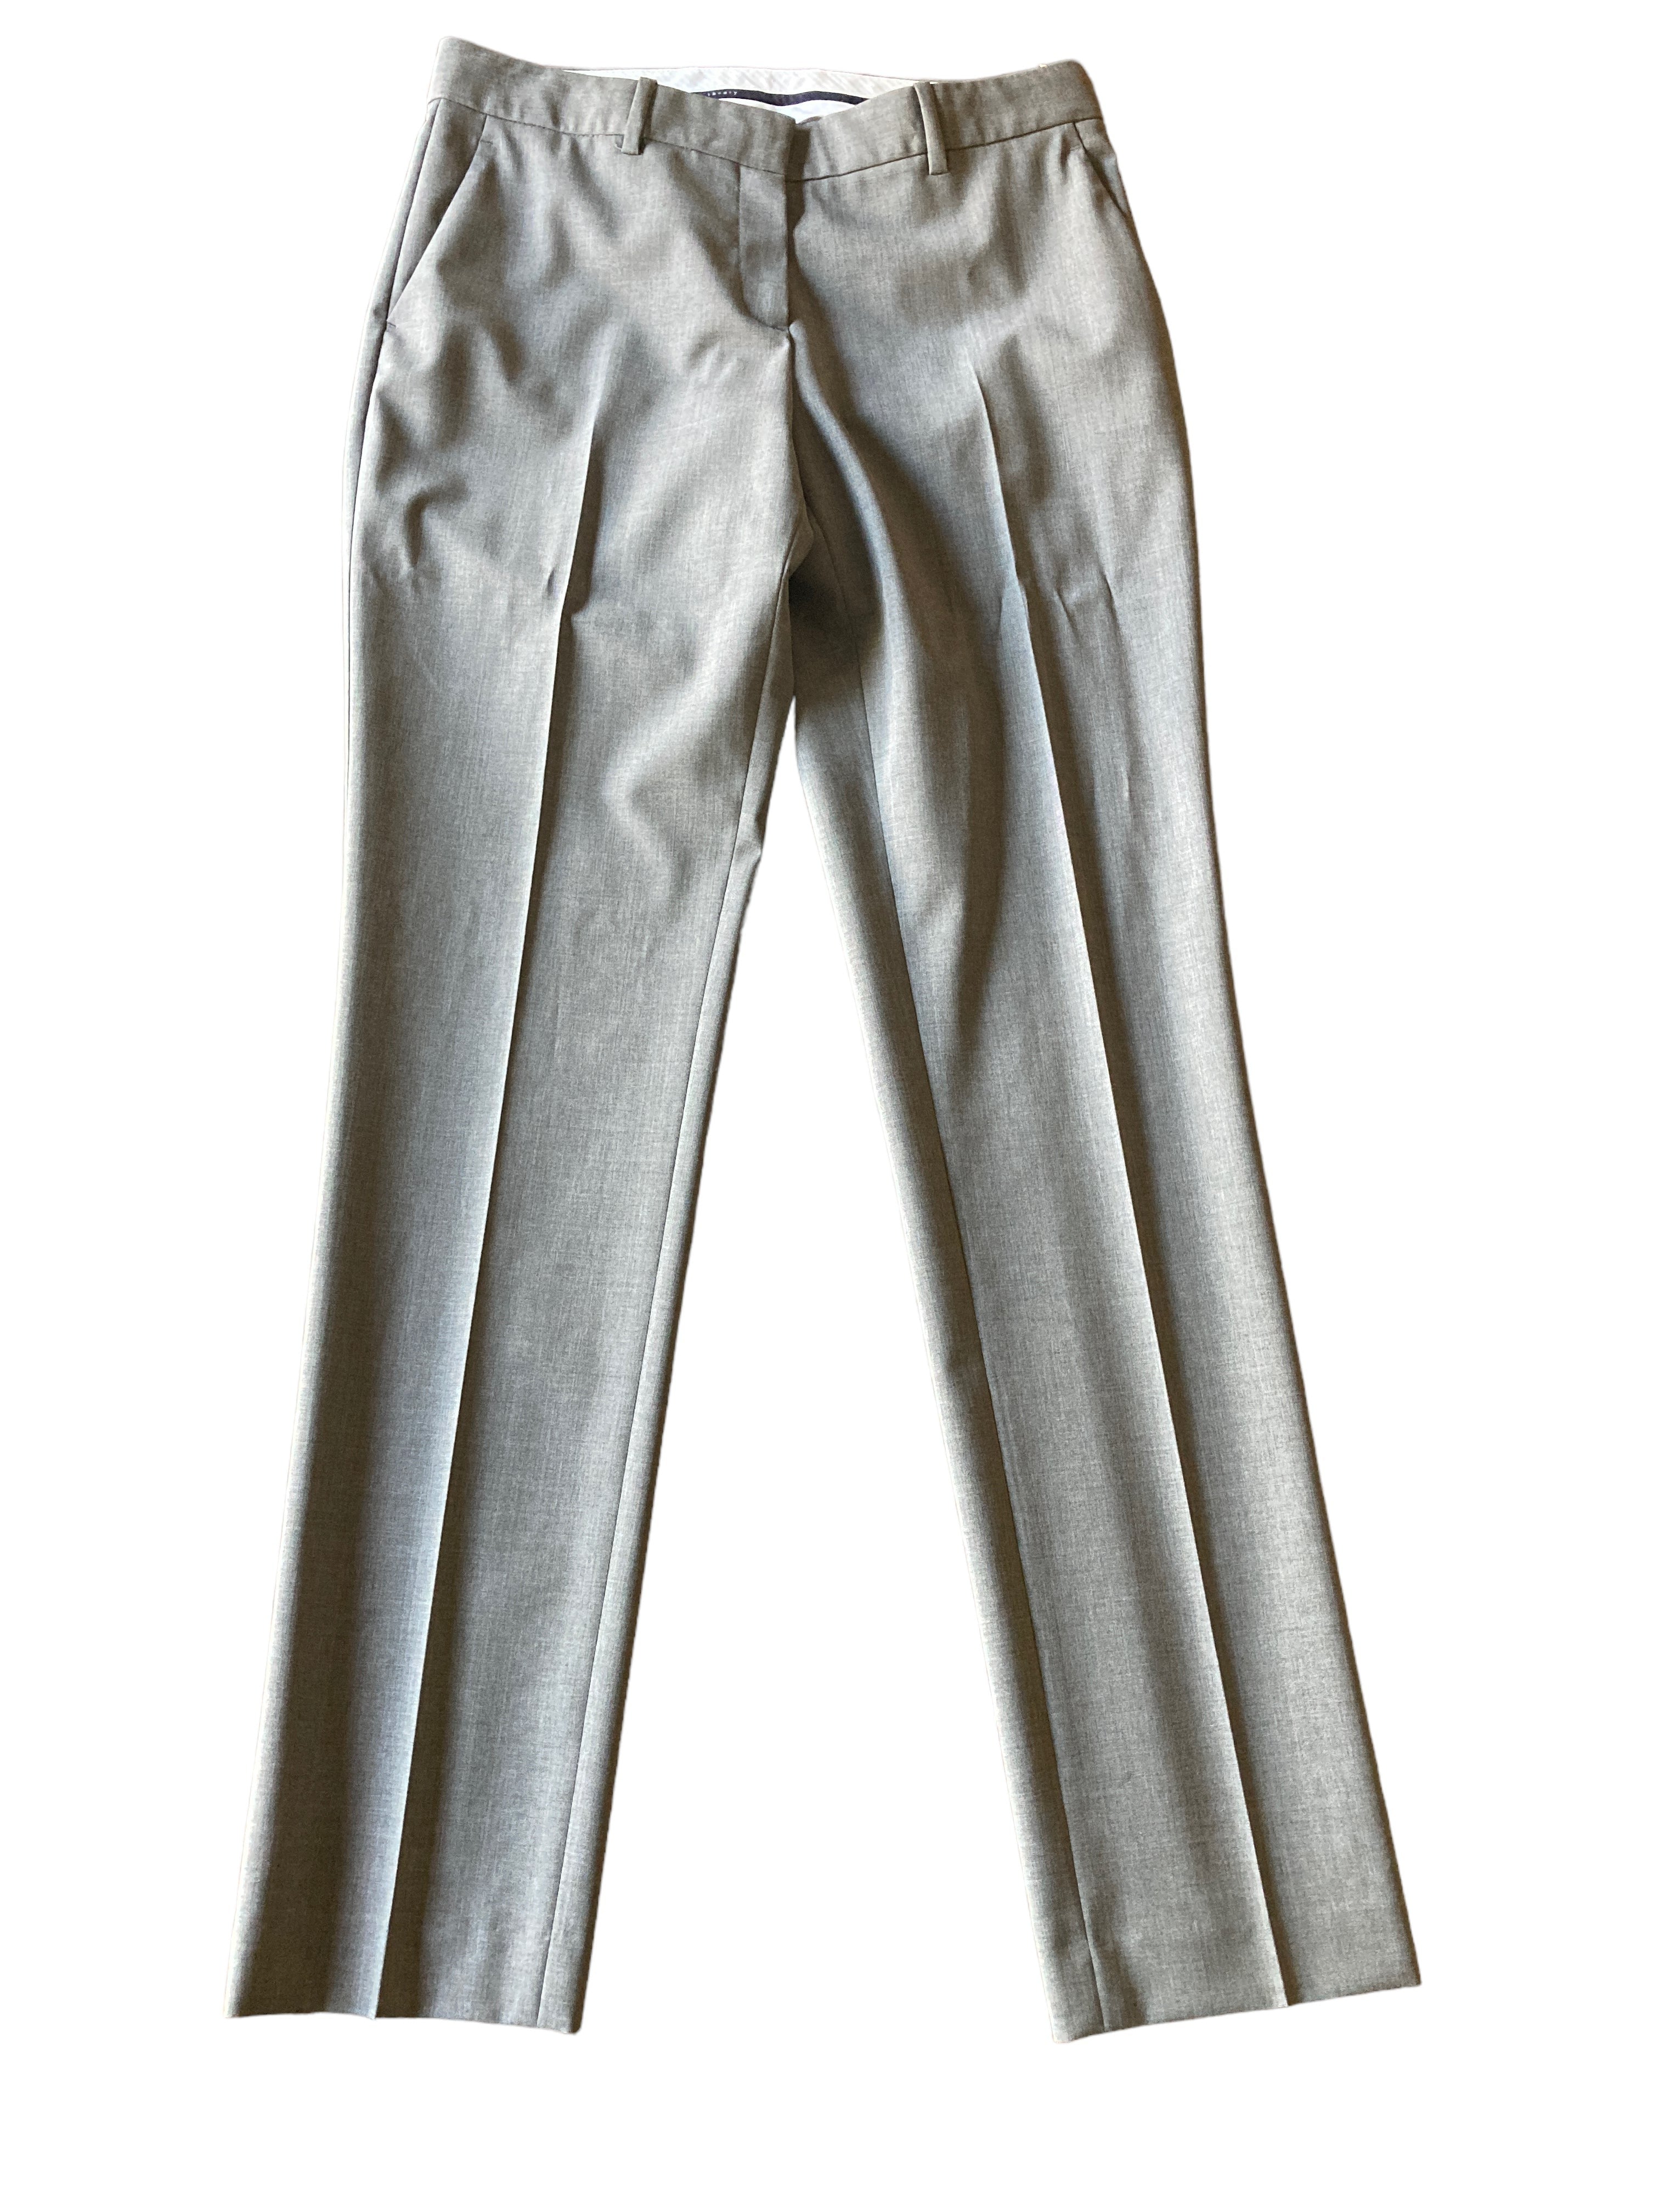 Theory Grey Wool Trousers, 8